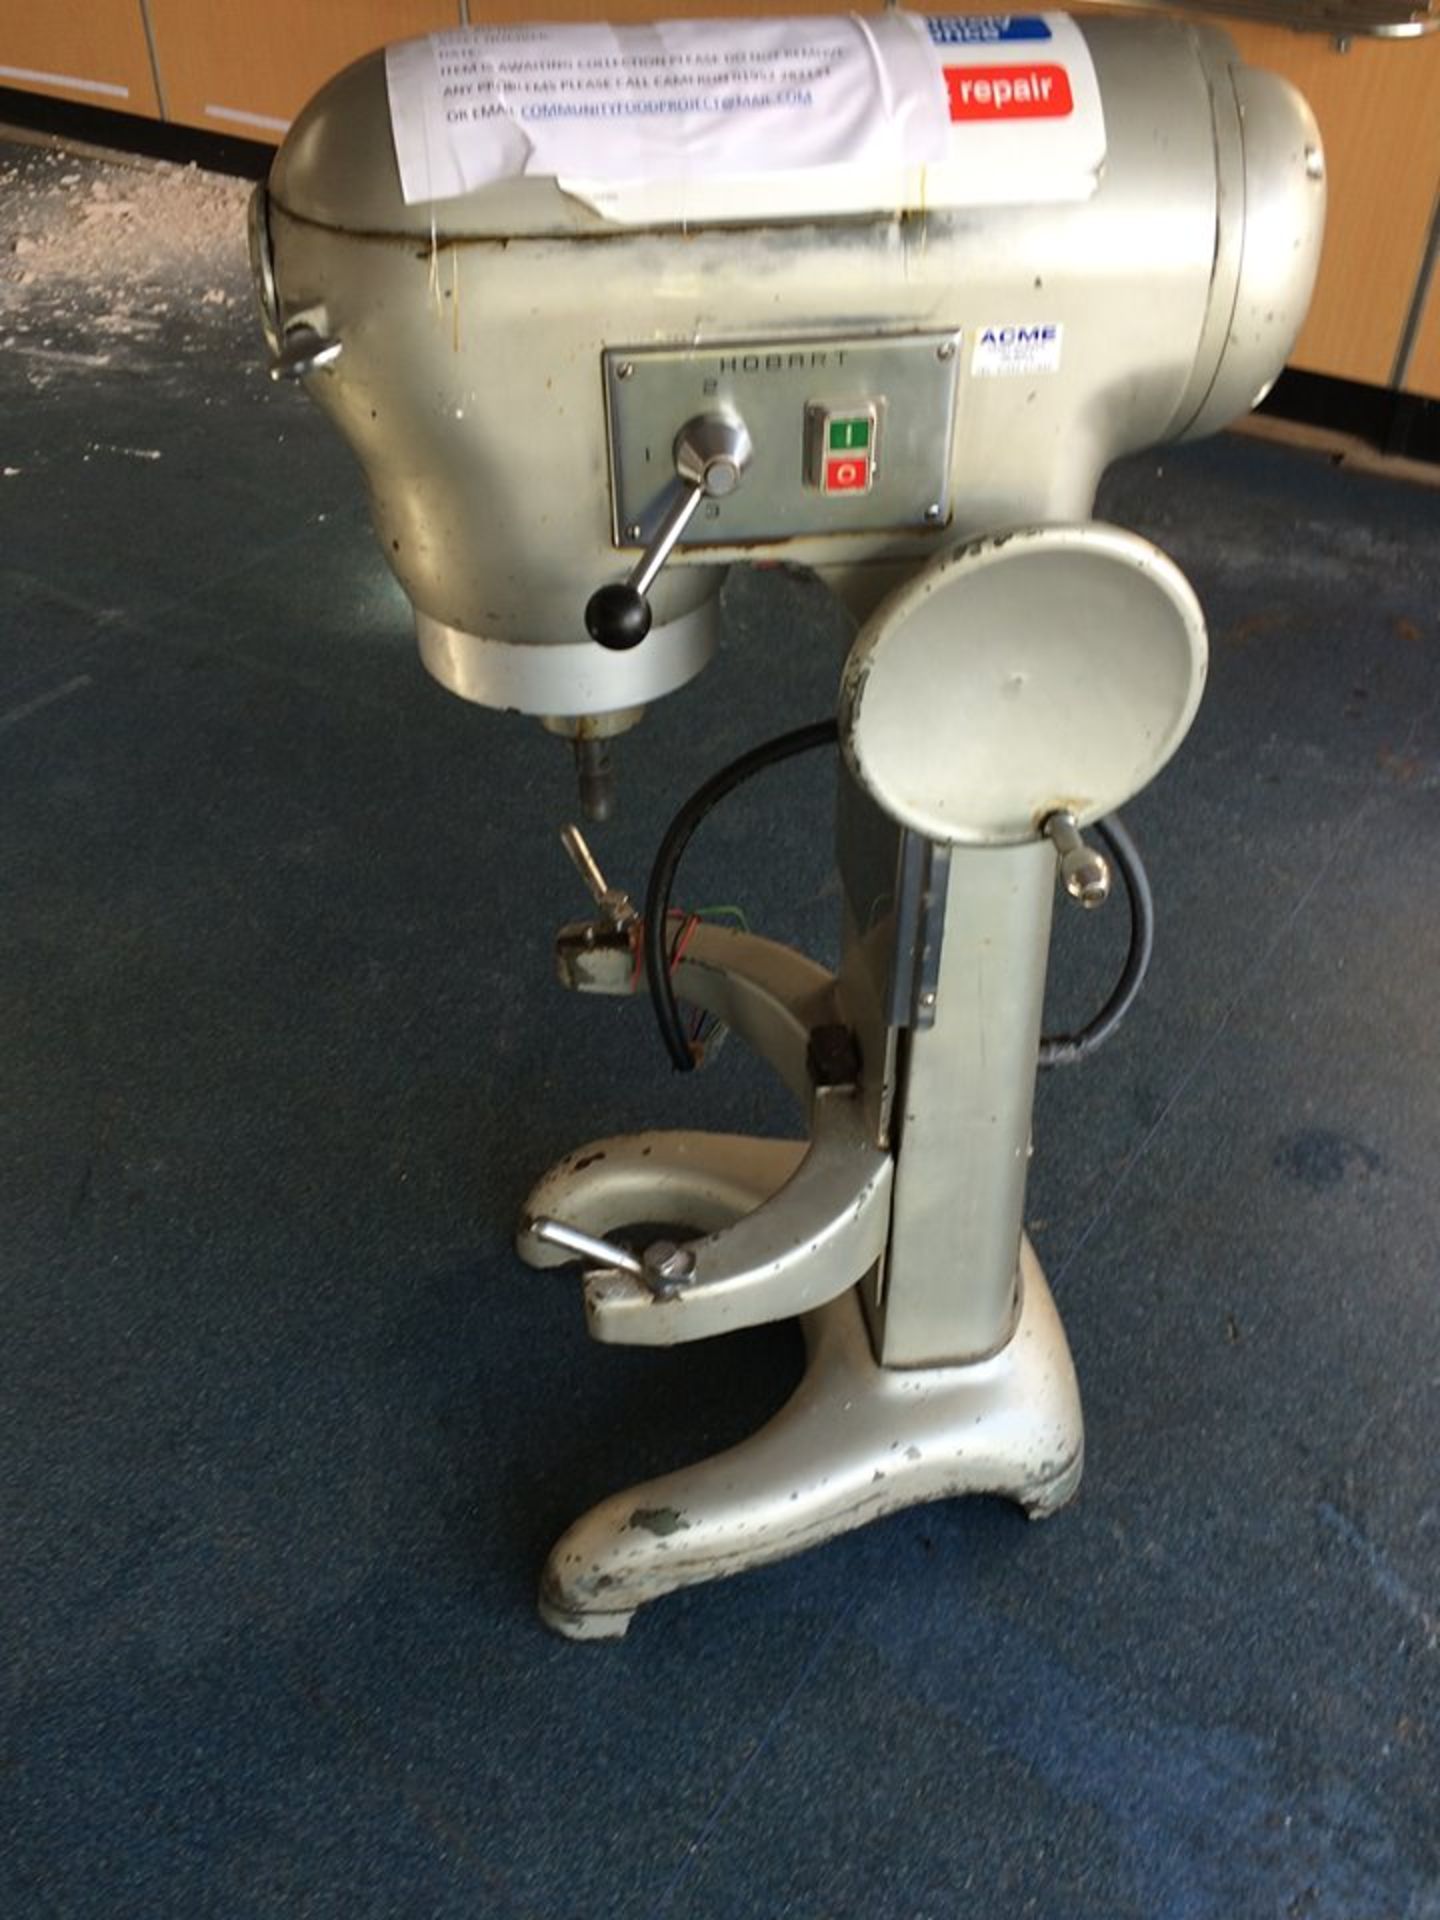 Bakery / Pizza / Industrial Food Mixer Hobart Se-320 240V Single Phase Mixer (Cost Just Over £14K)